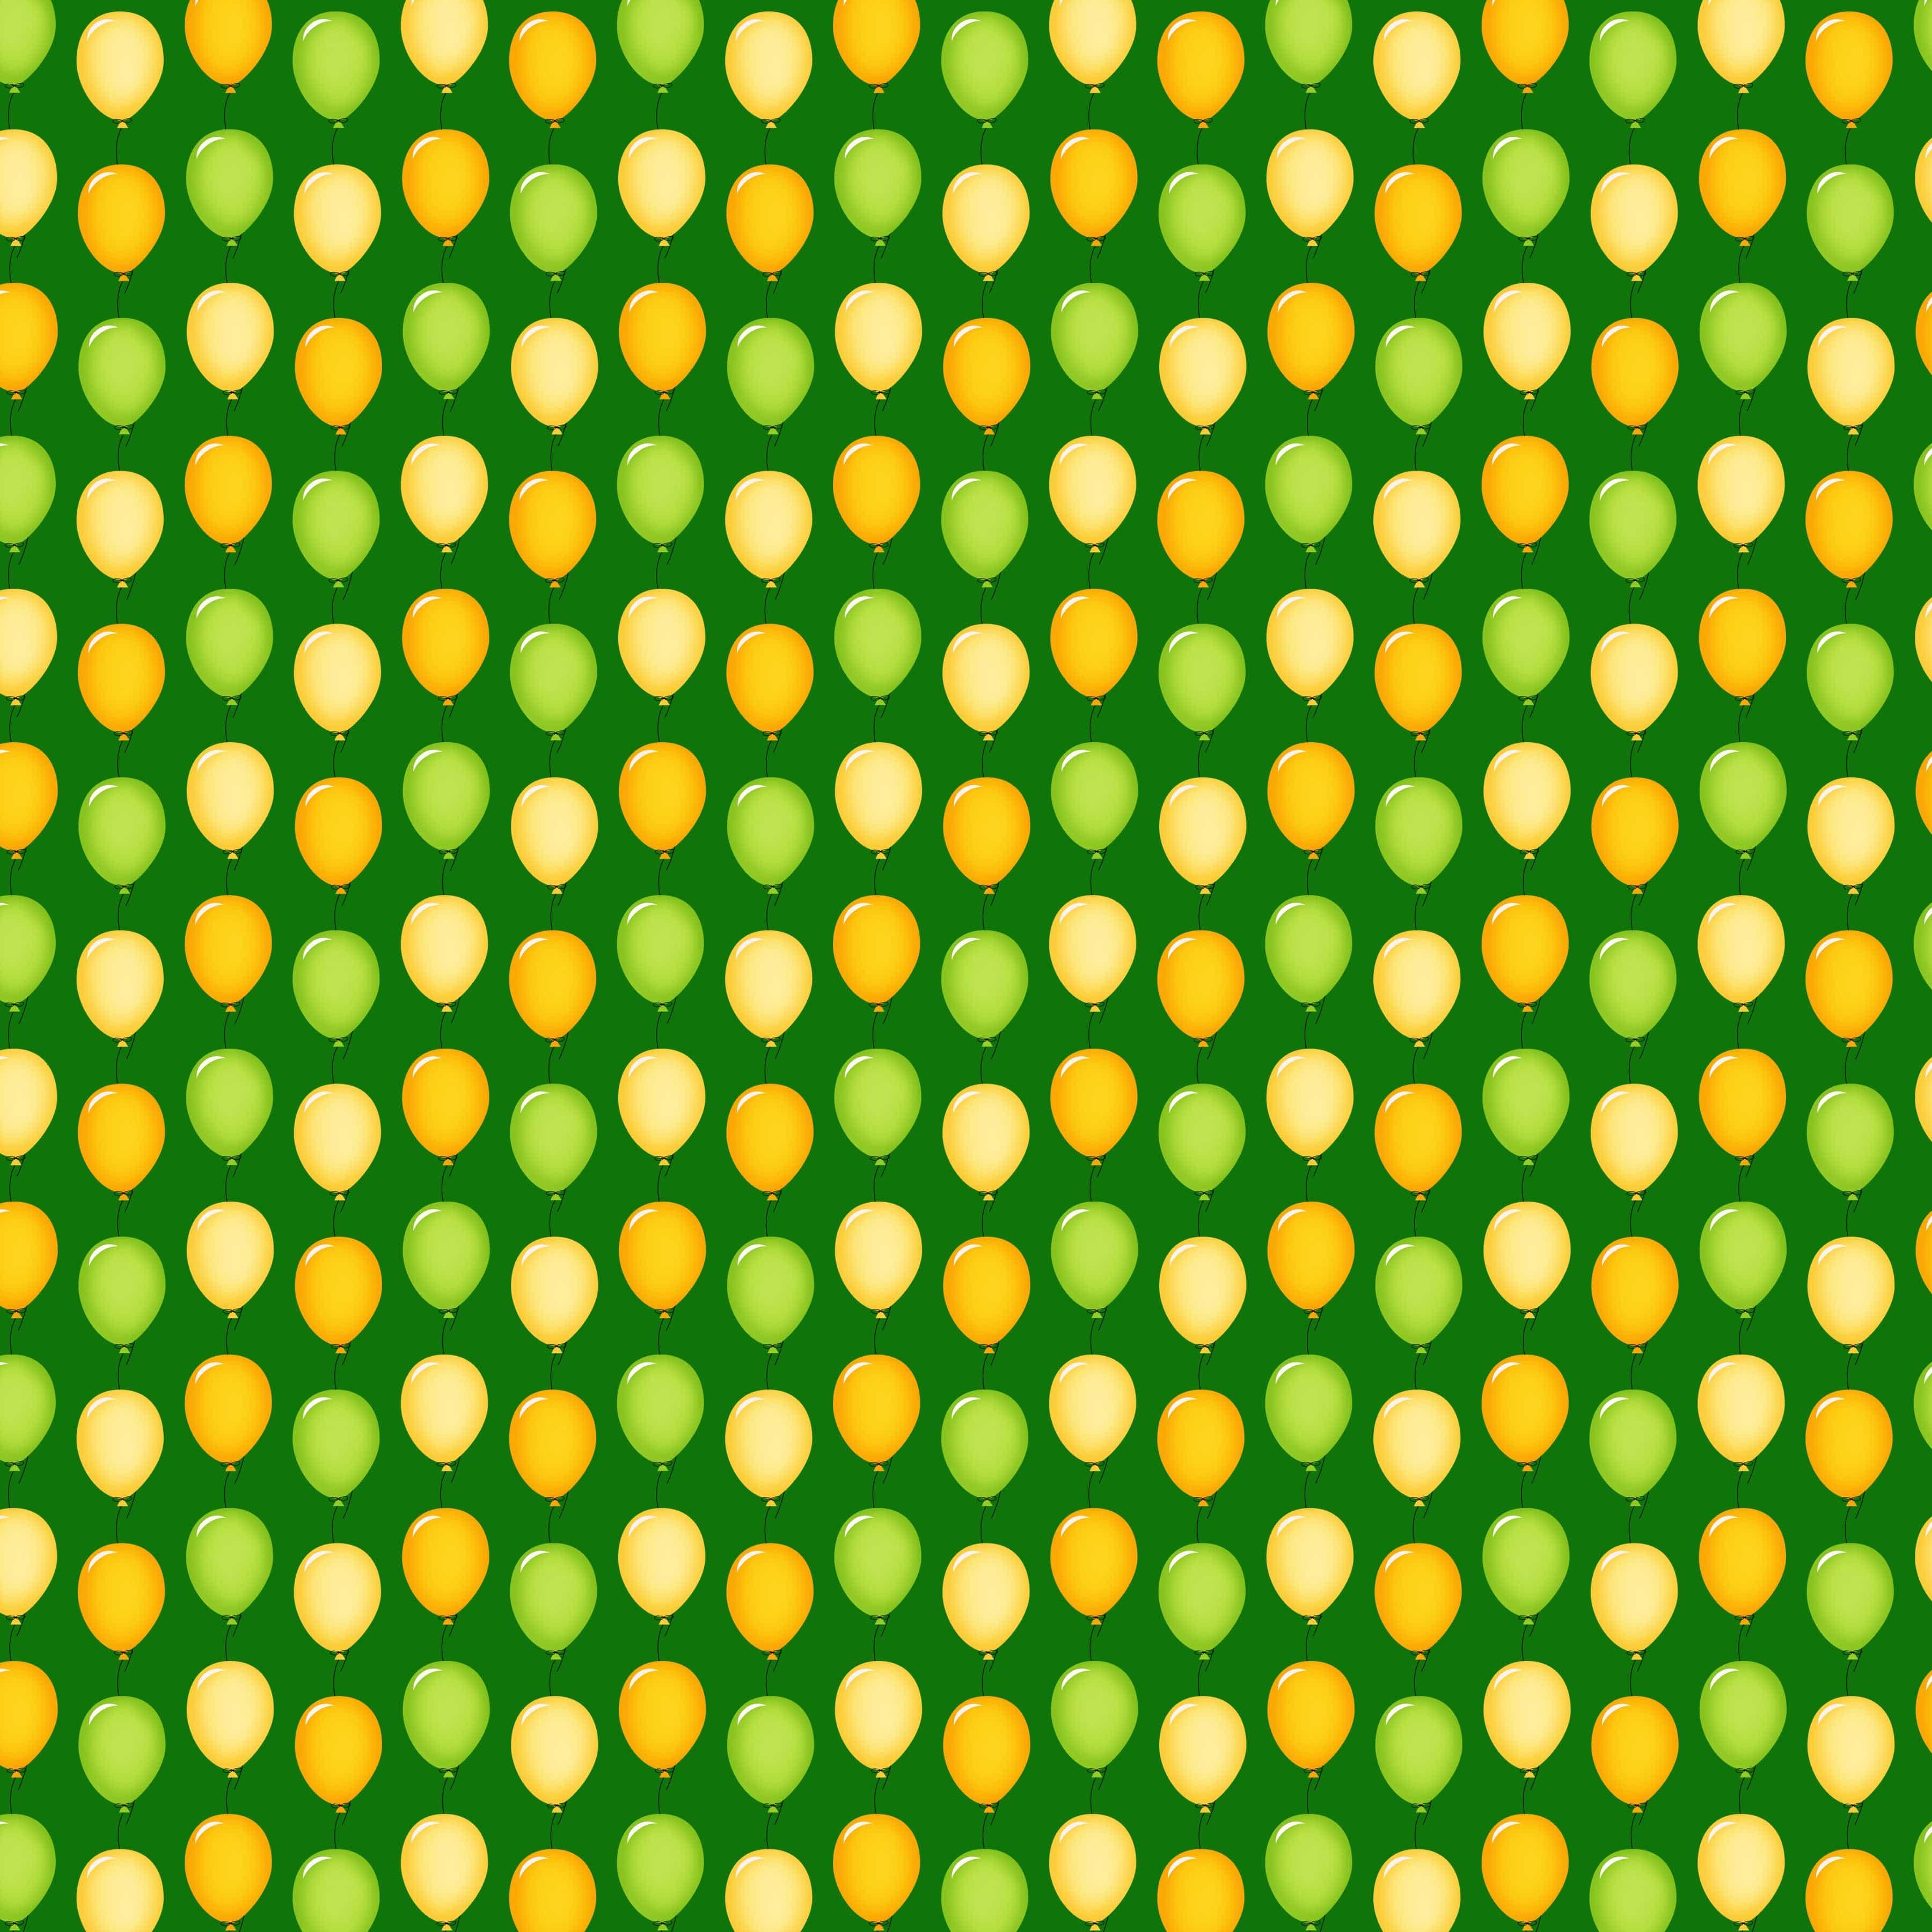 Lucky Irish Collection Lucky Balloons 12 x 12 Double-Sided Scrapbook Paper by SSC Designs - Scrapbook Supply Companies